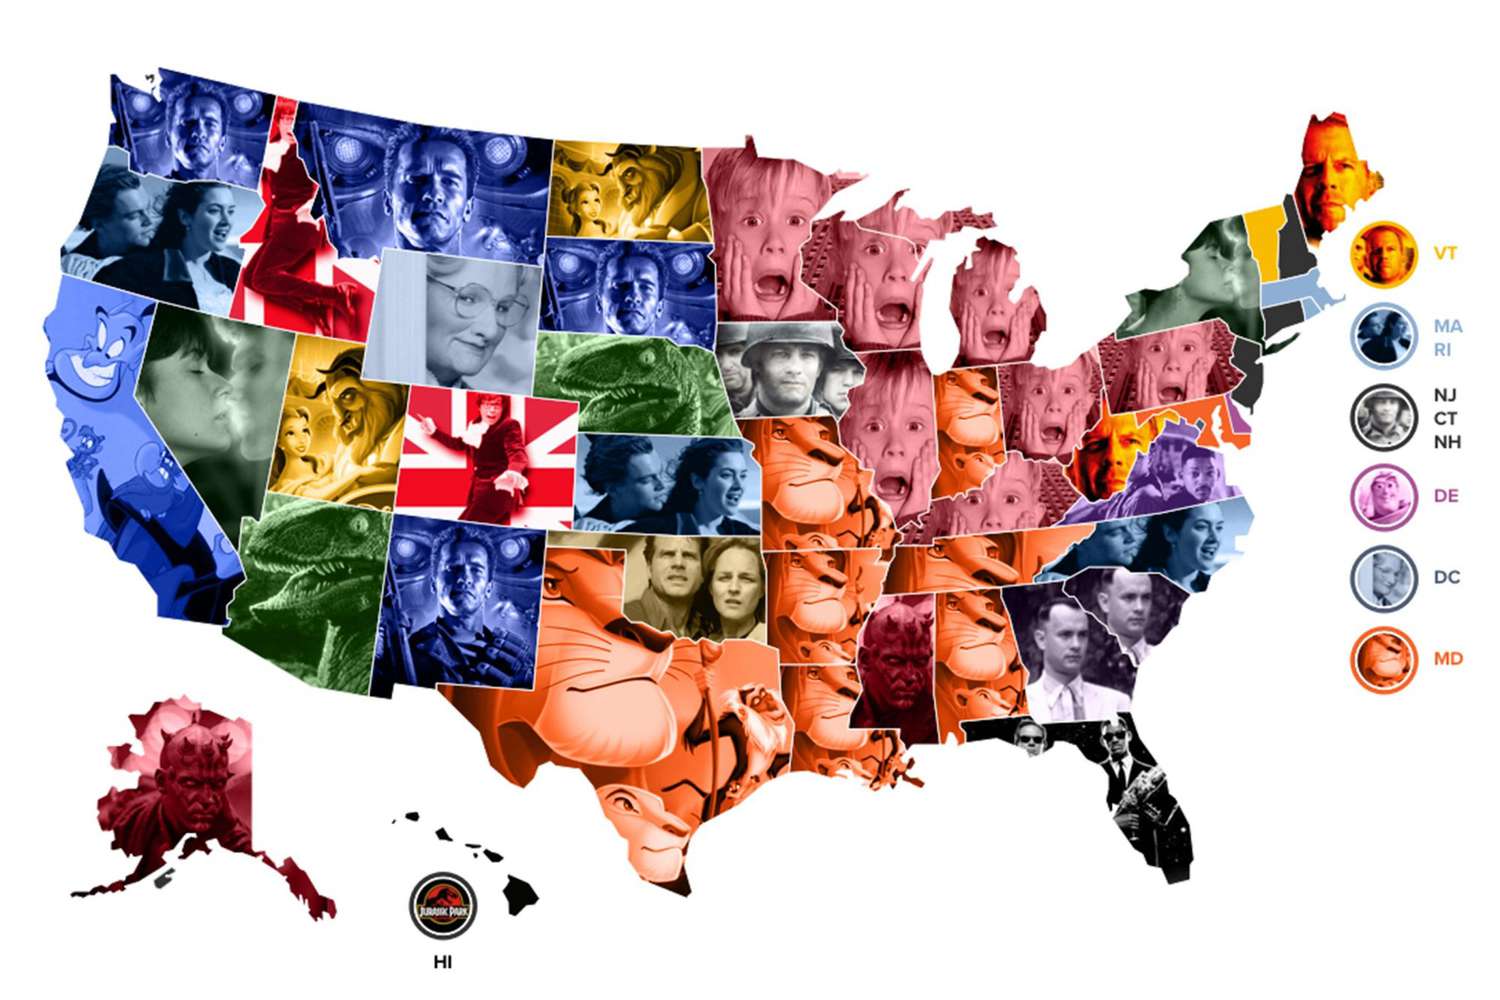 Favorite '90s movie, by state